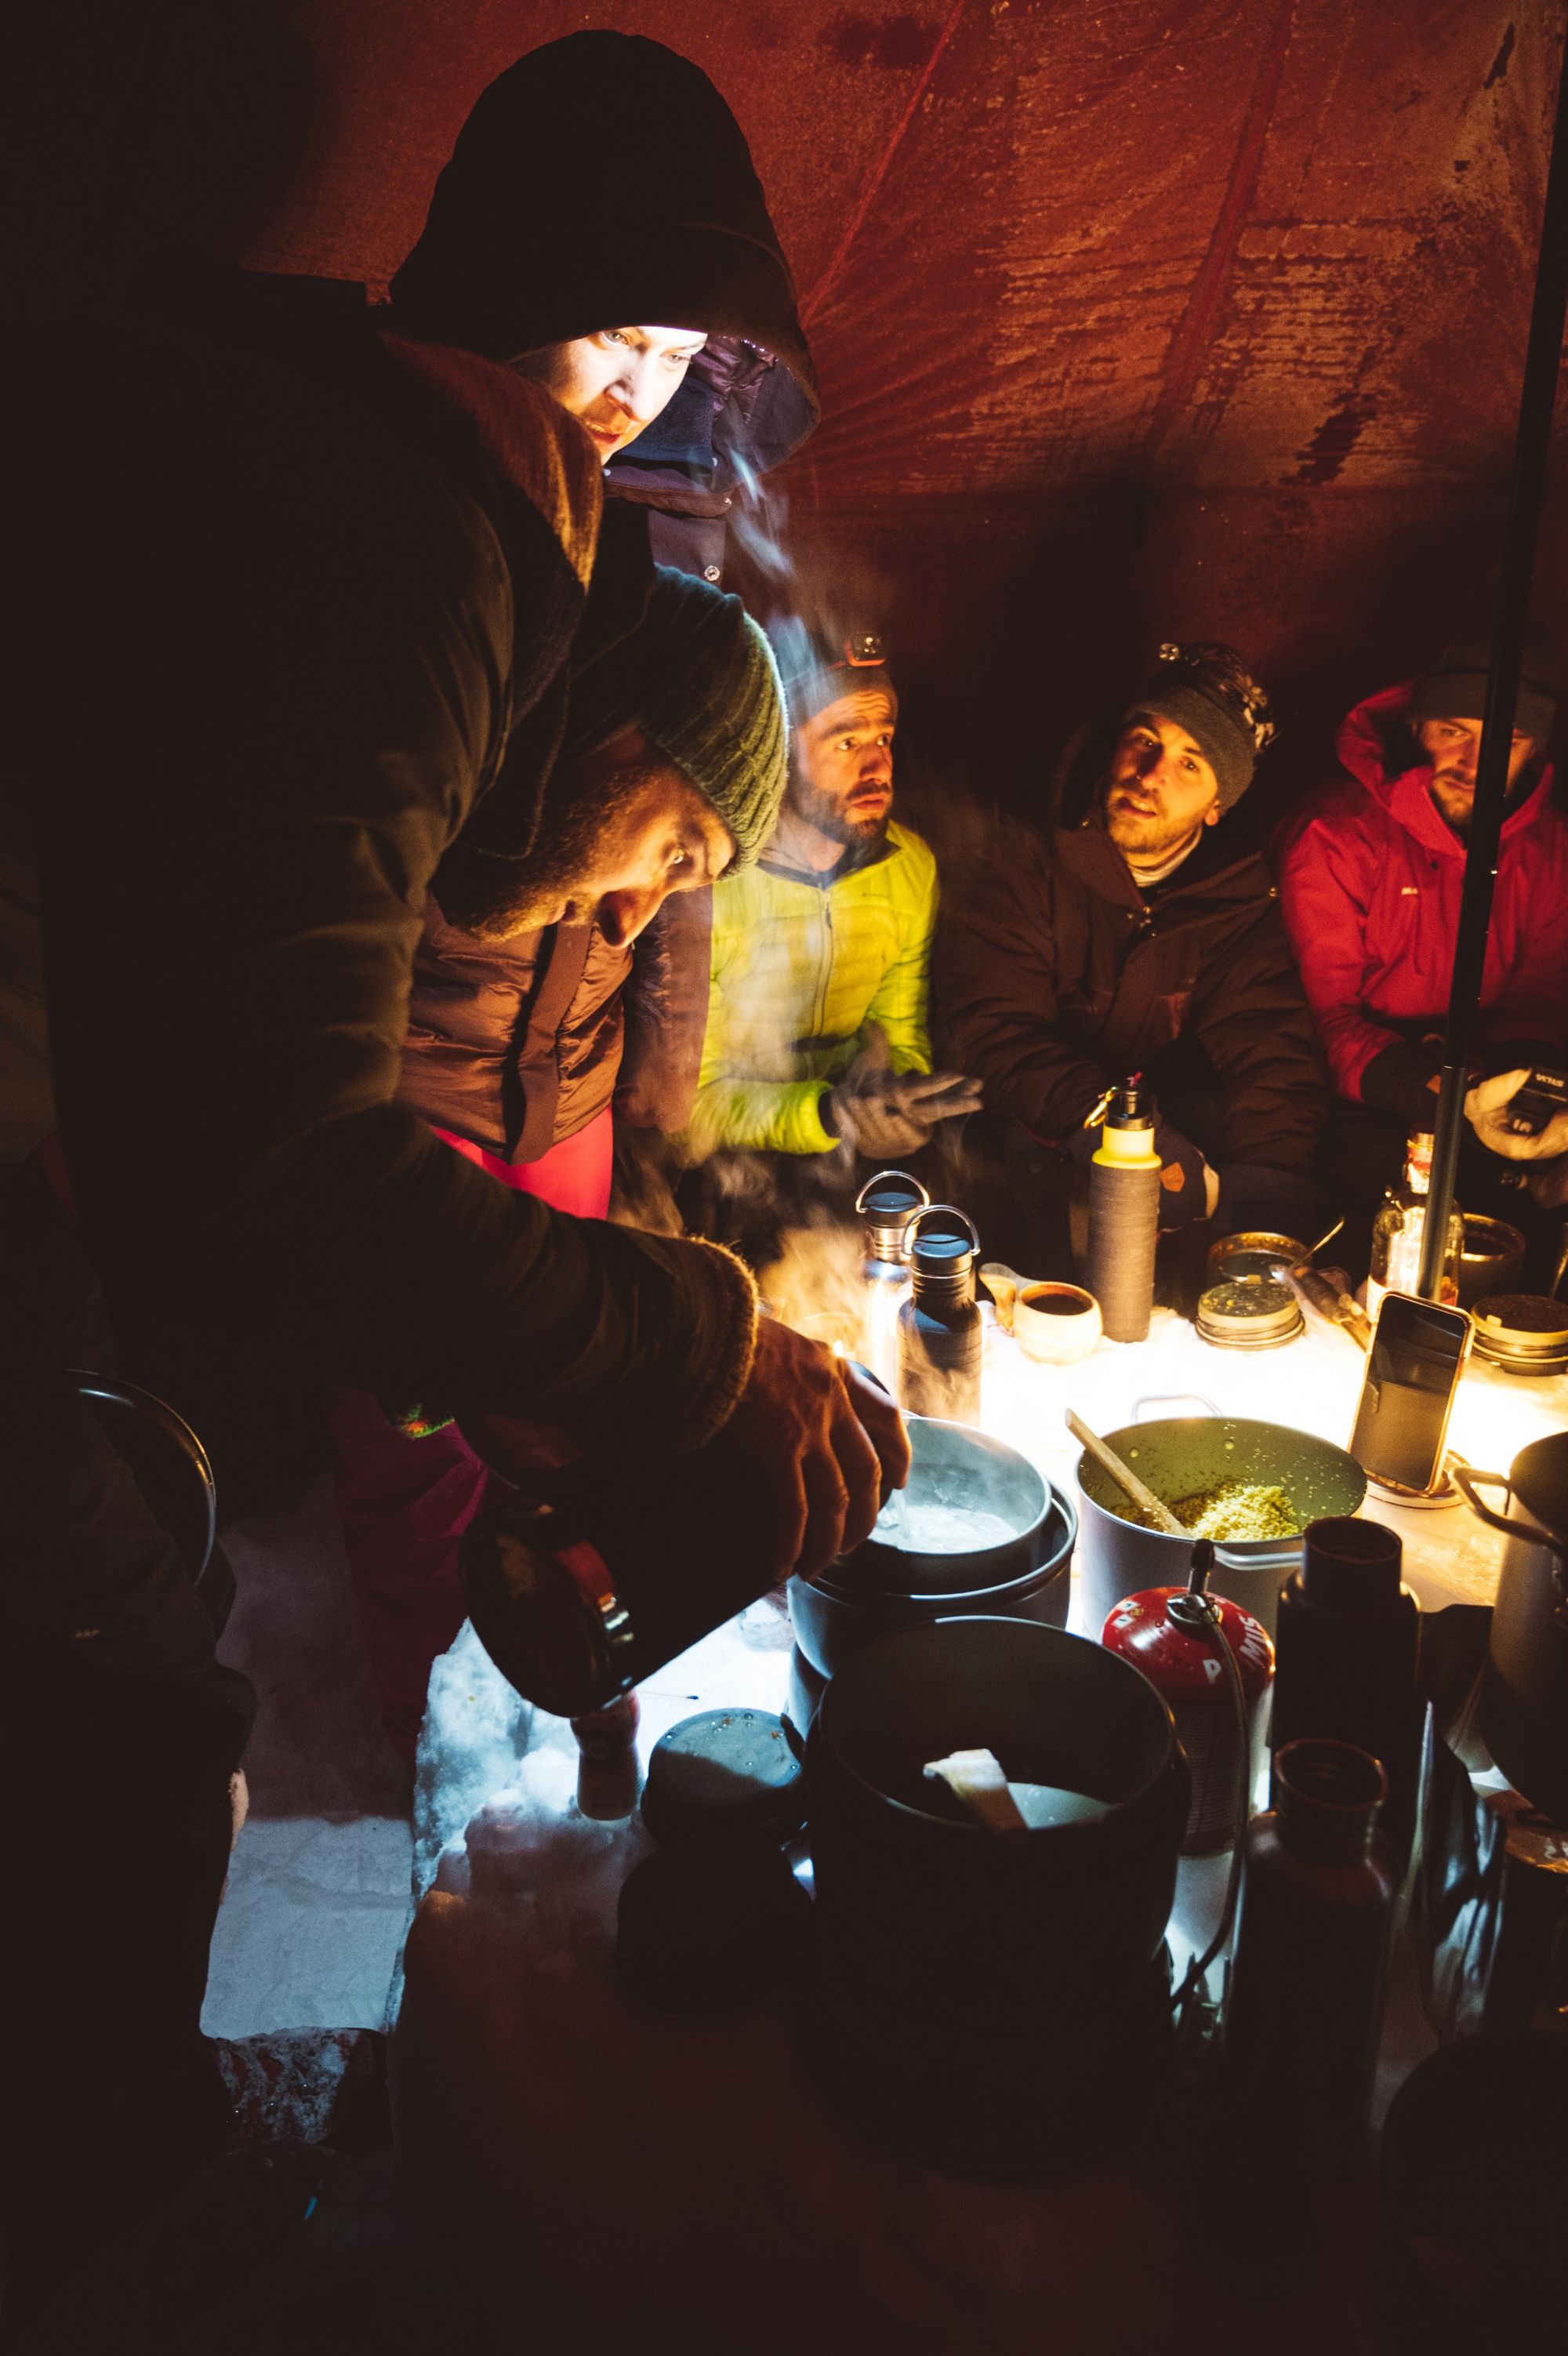 A group wait for their guide to serve up coffee after a day exploring in the Swedish snow. Photo: Do the North